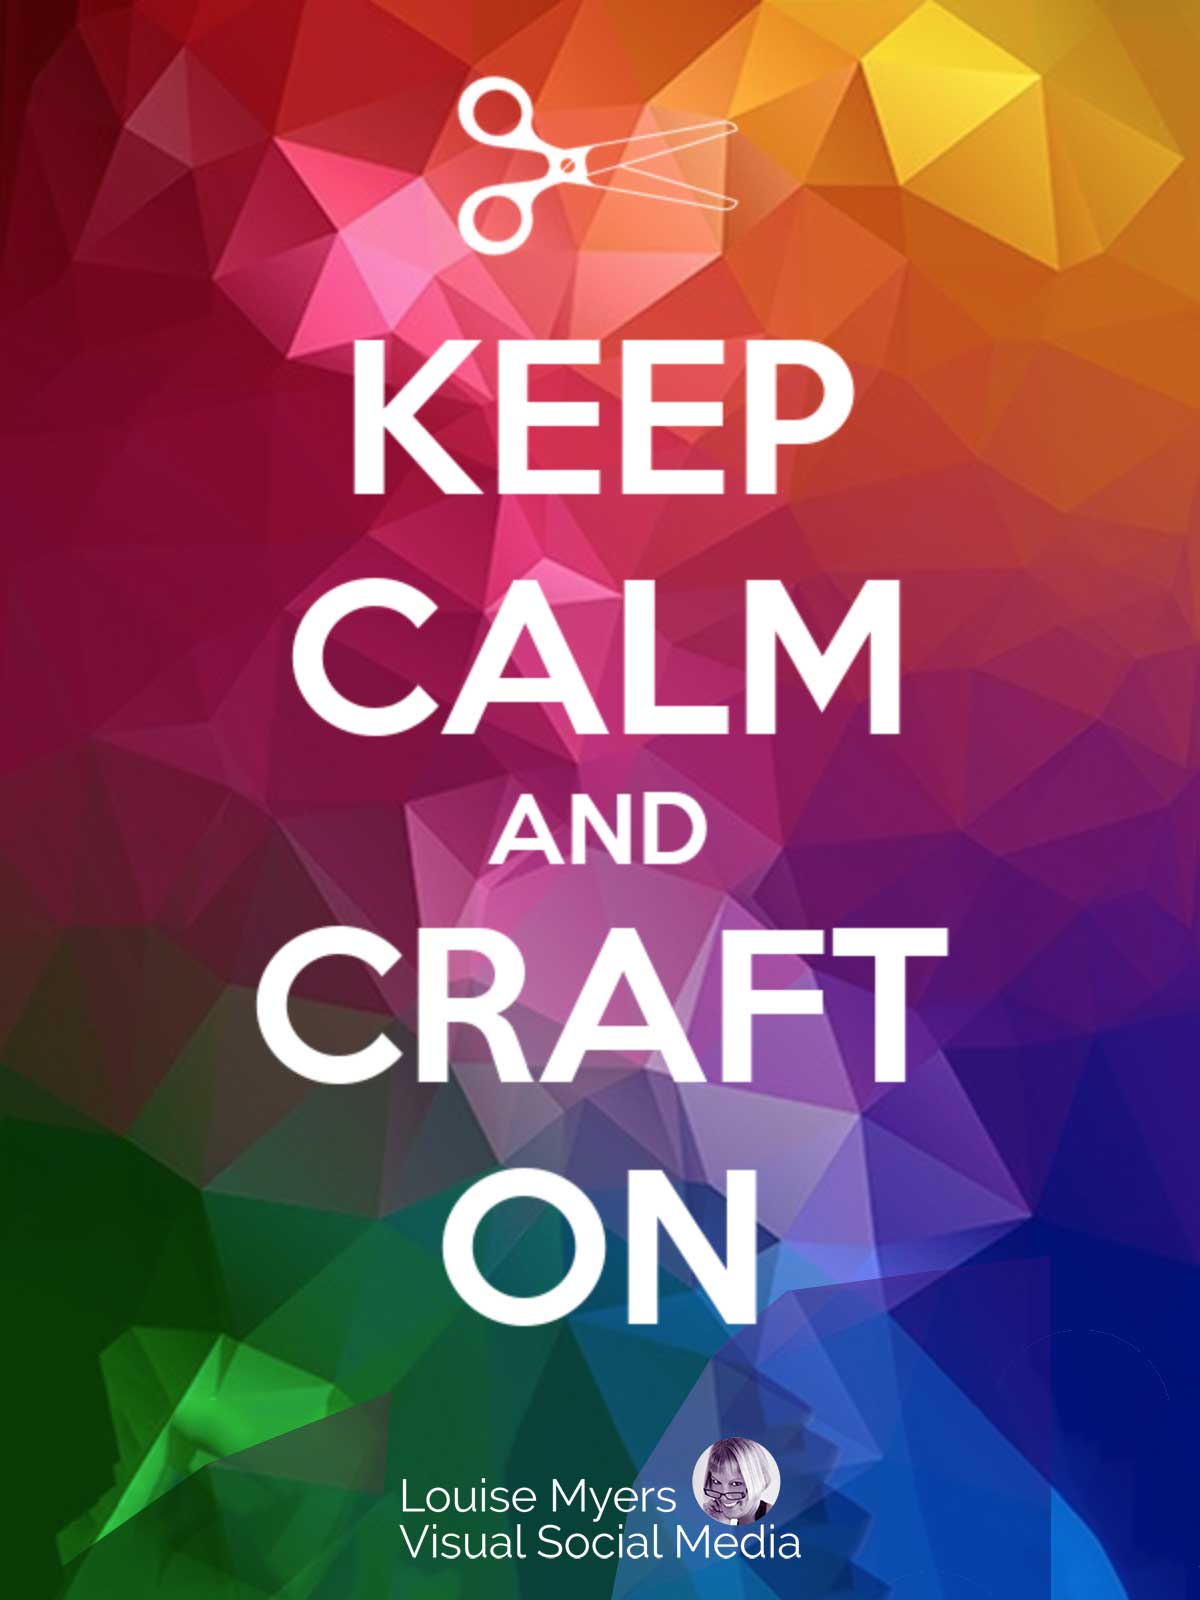 colorful prismatic background has text, Keep calm and craft on, with scissors icon.